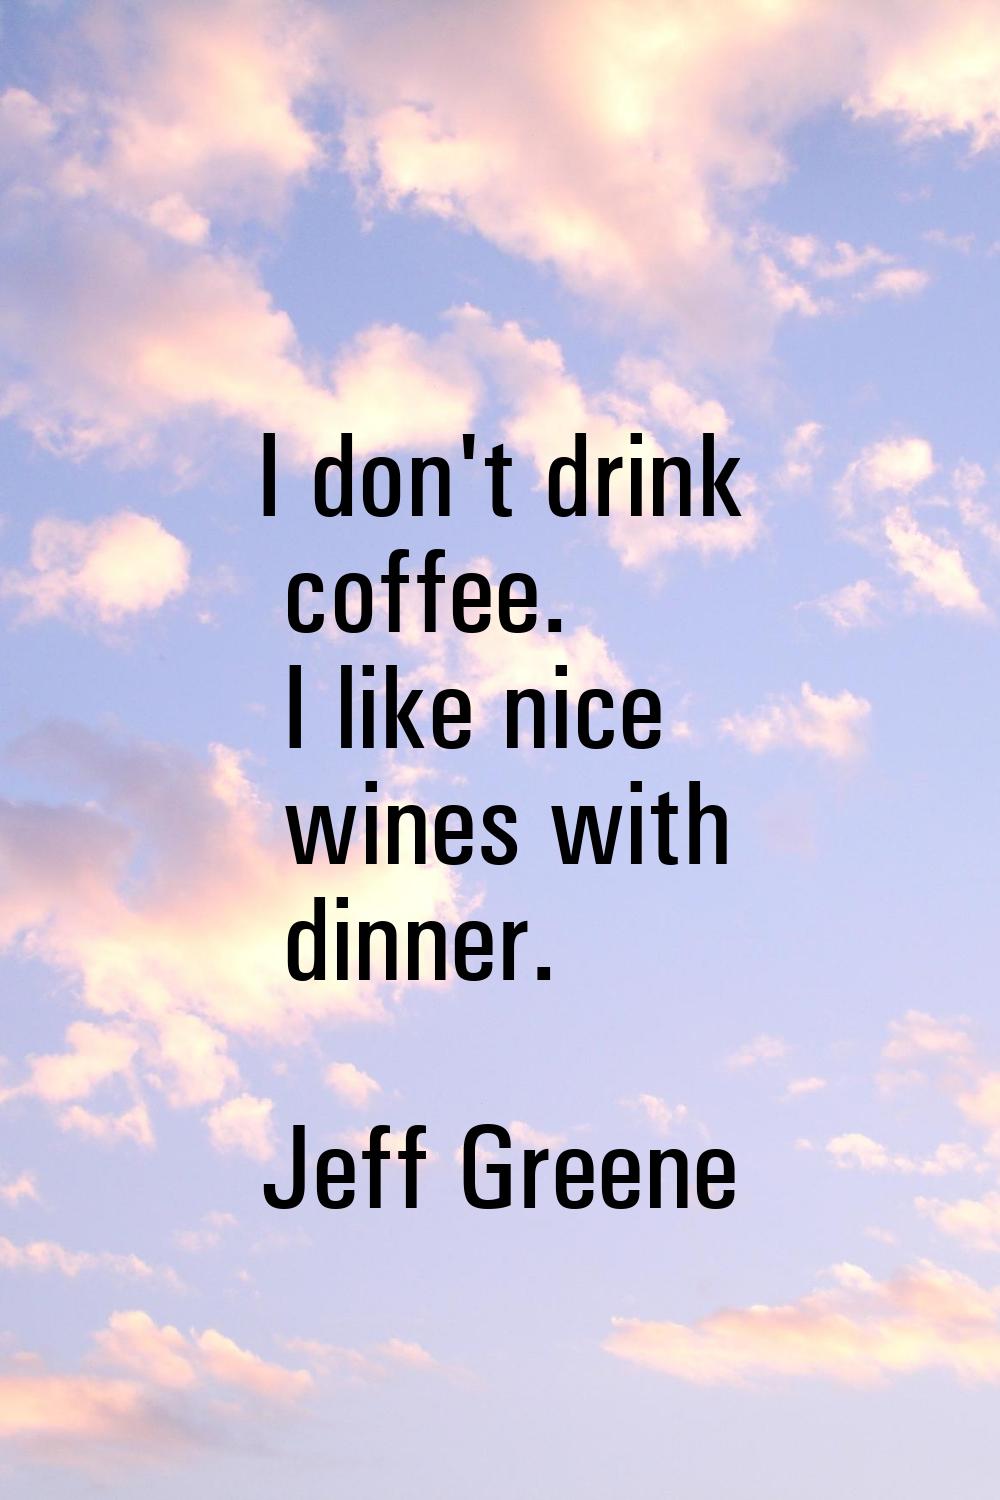 I don't drink coffee. I like nice wines with dinner.